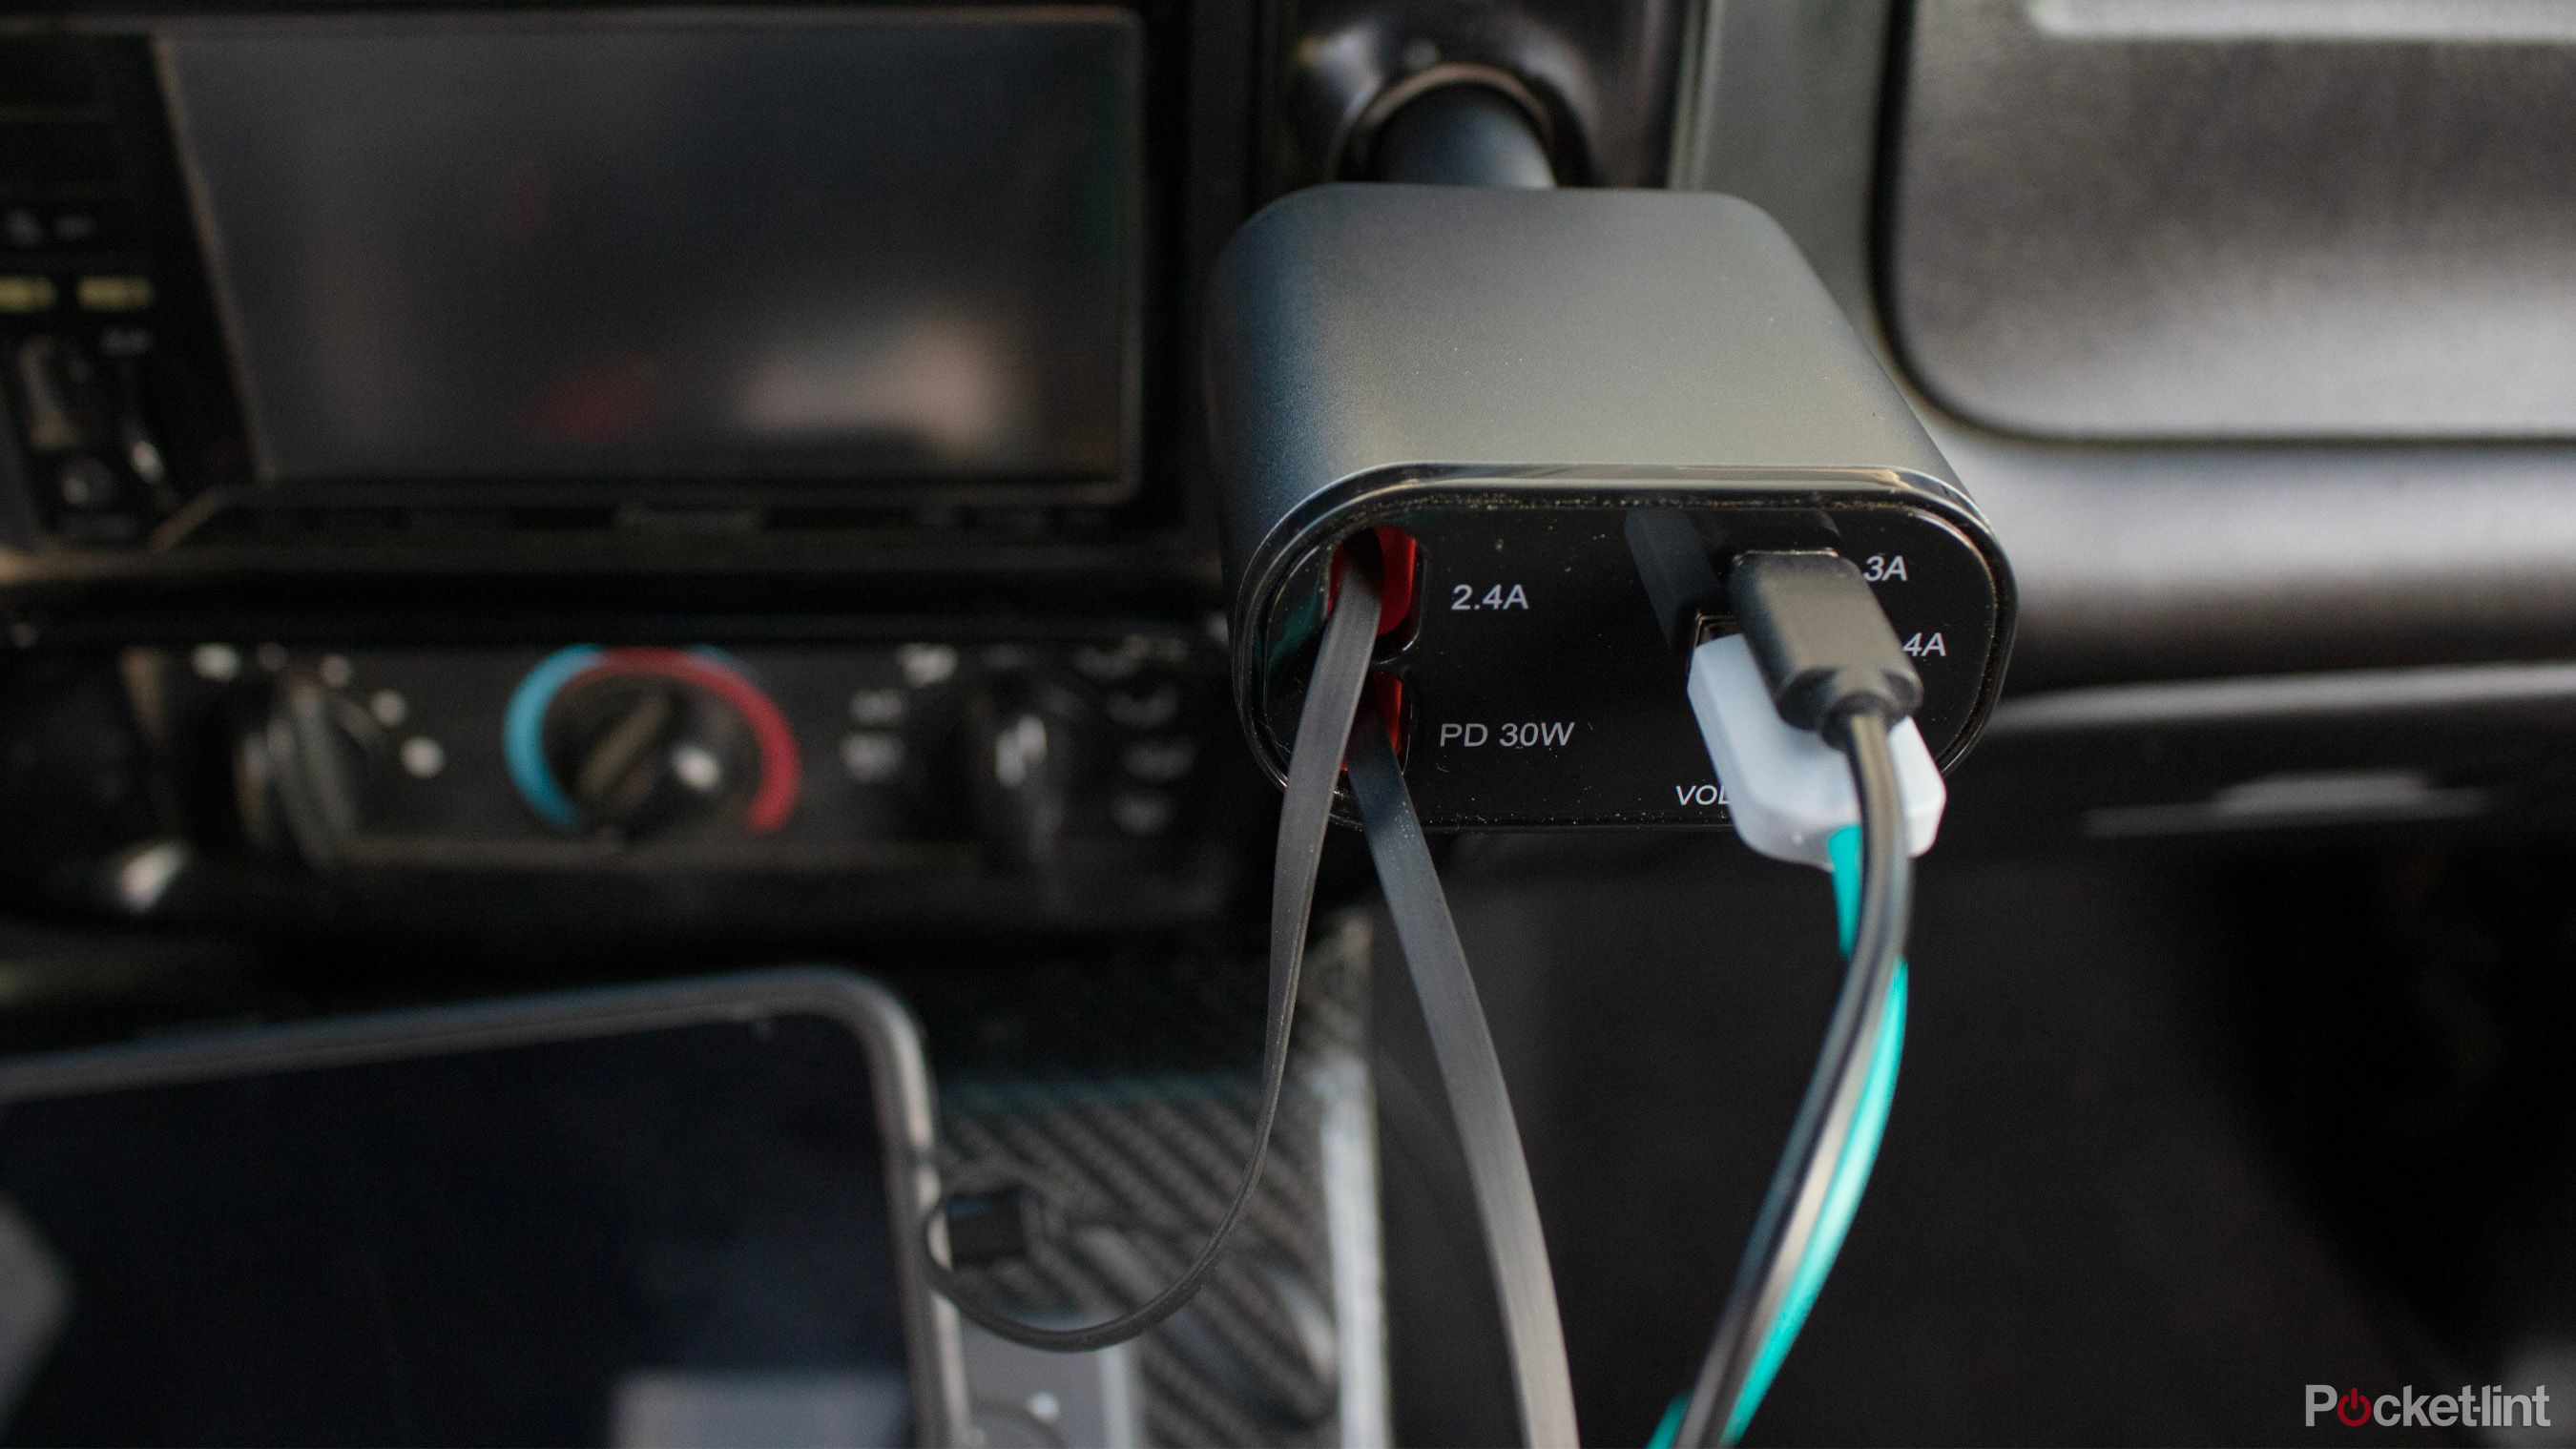 The Super Fast Charge Retractable Car Charger offers 4 in 1 functionality and can power up to 4 devices simultaneously.